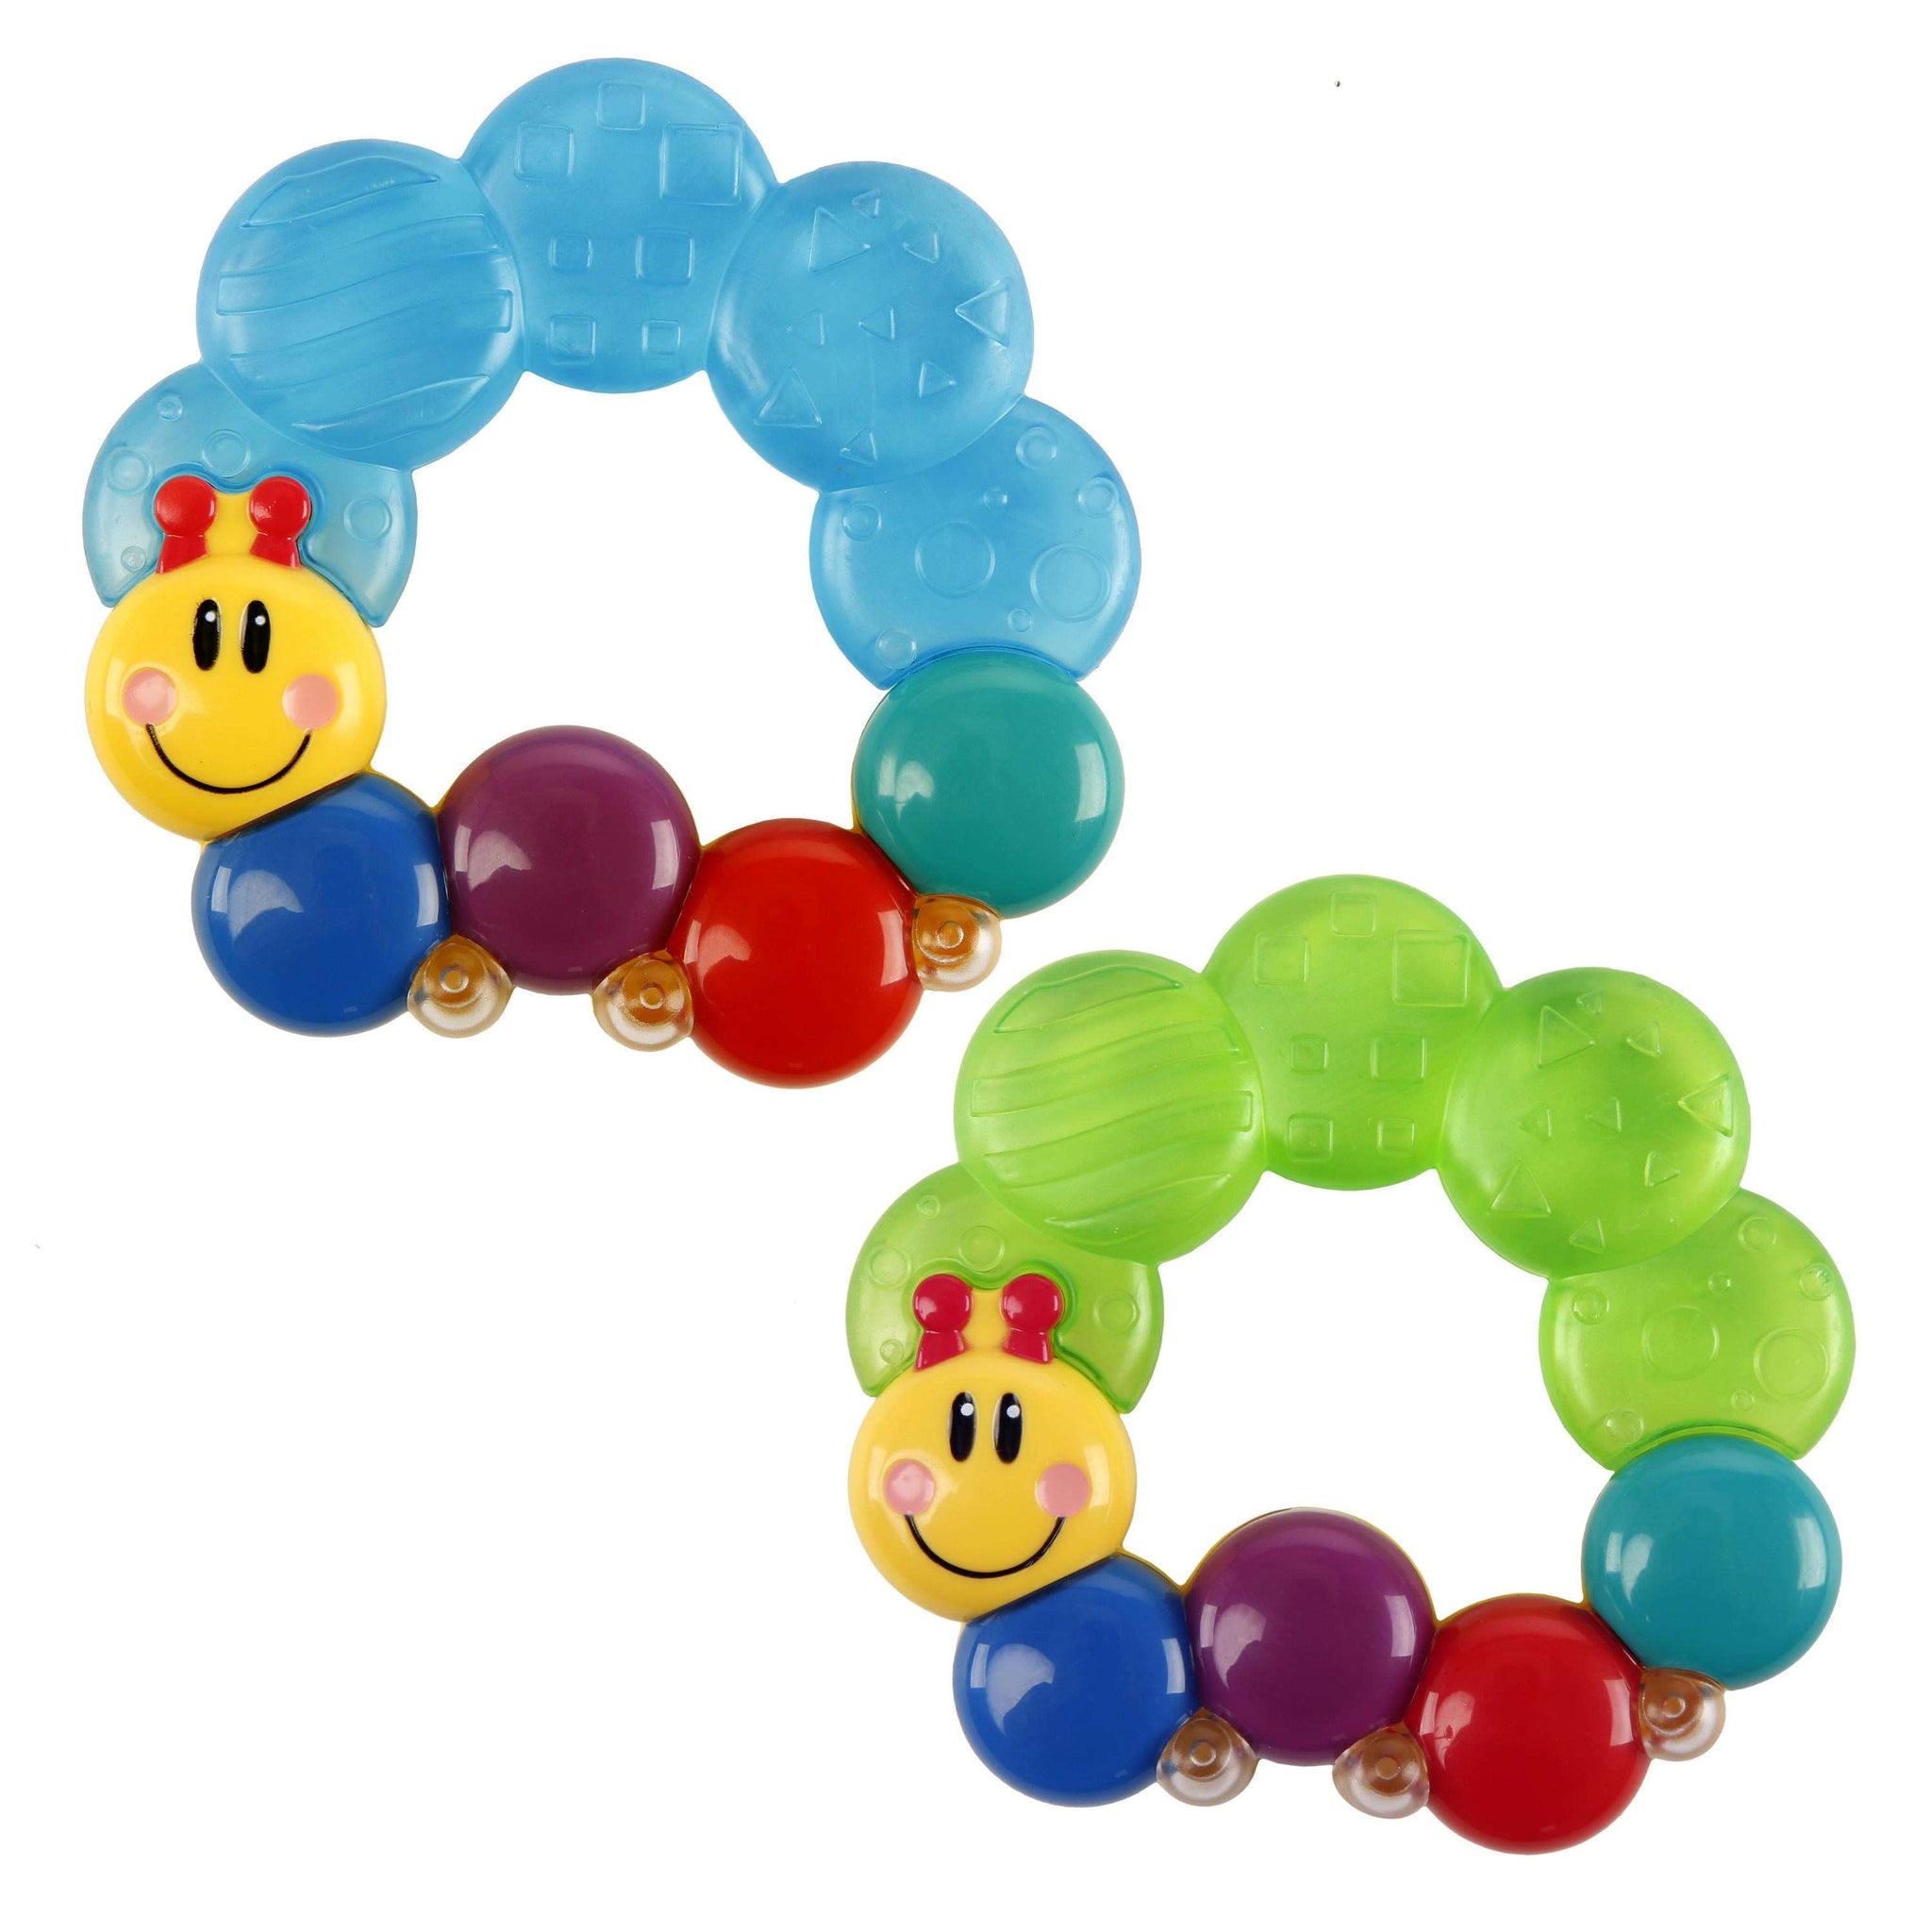 Baby Einstein Caterpillar Water Teether for first teeth The Toy Wagon